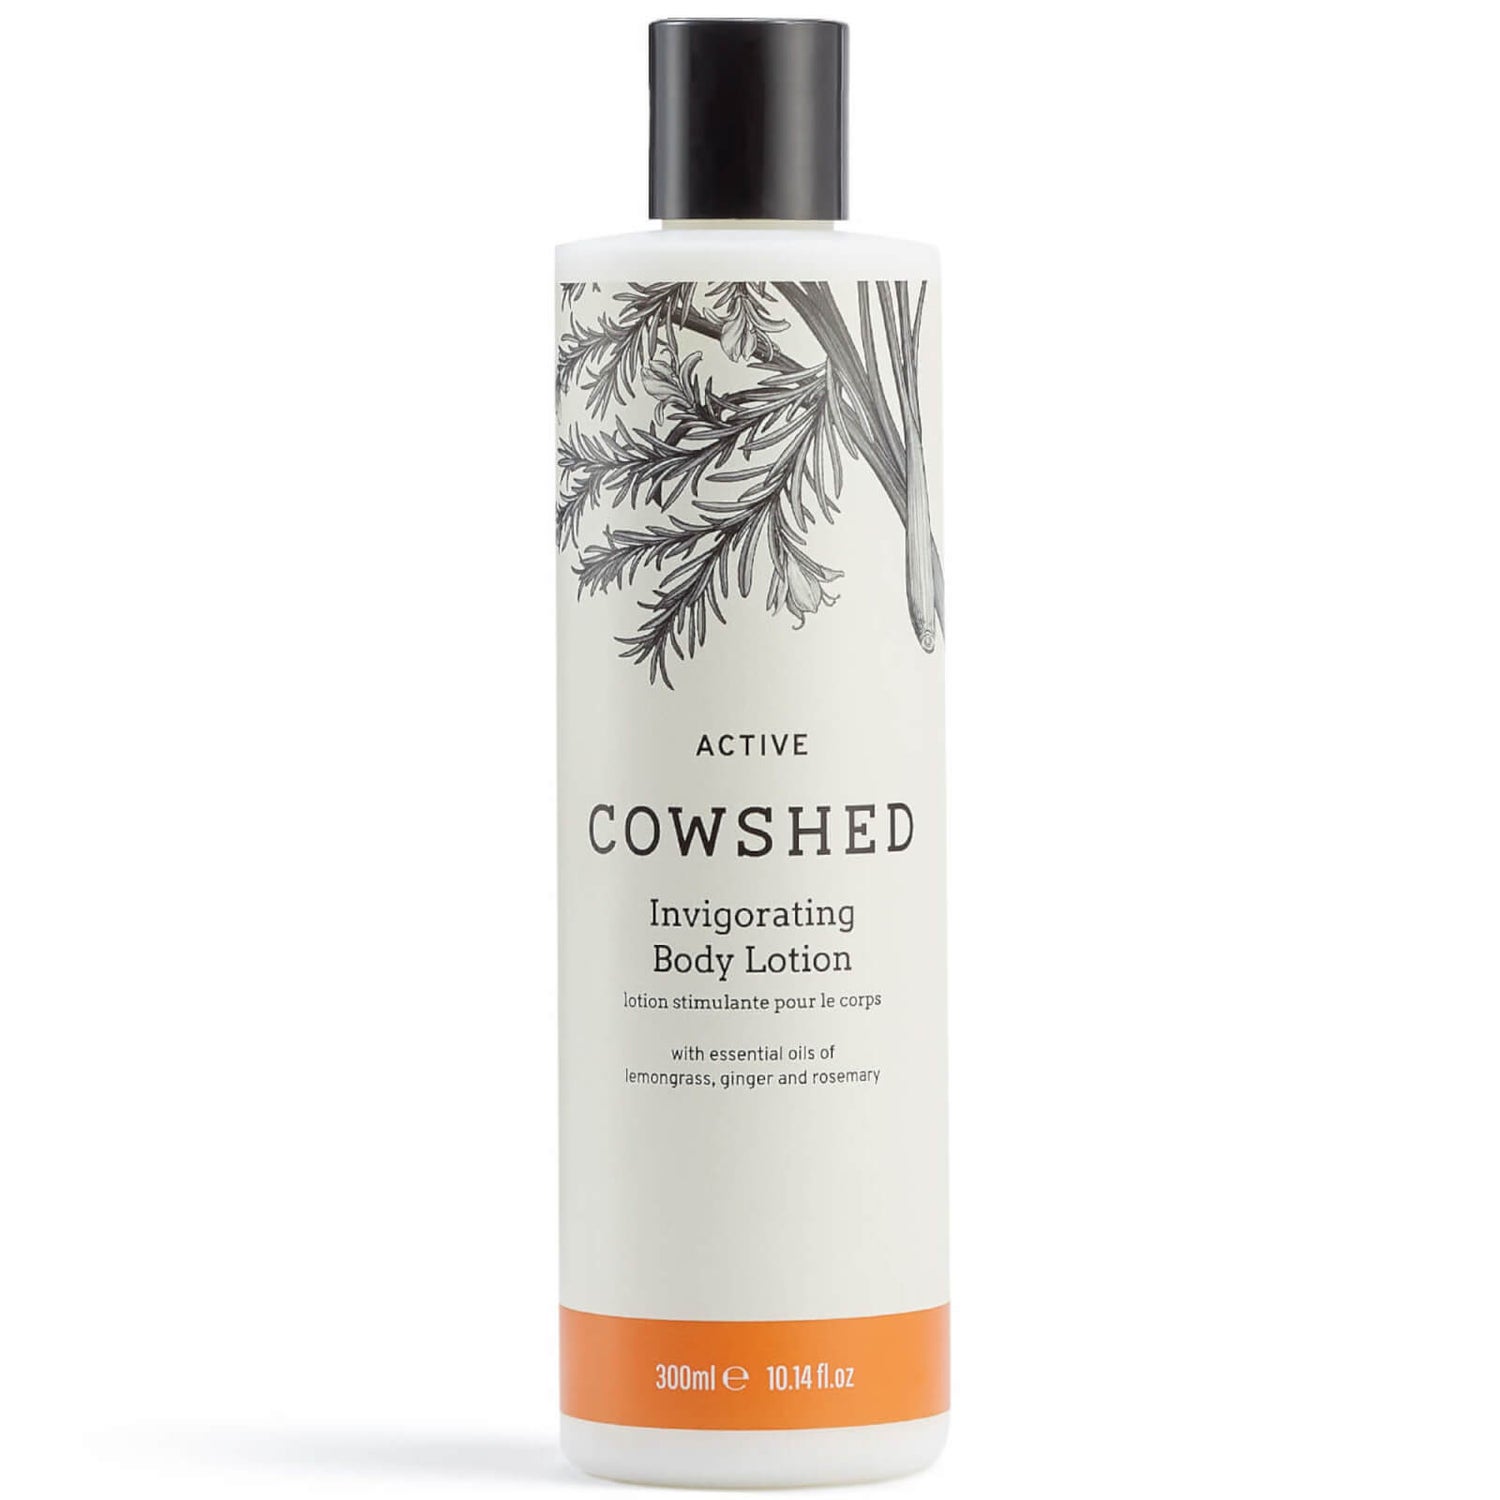 Cowshed ACTIVE Invigorating Body Lotion 300ml